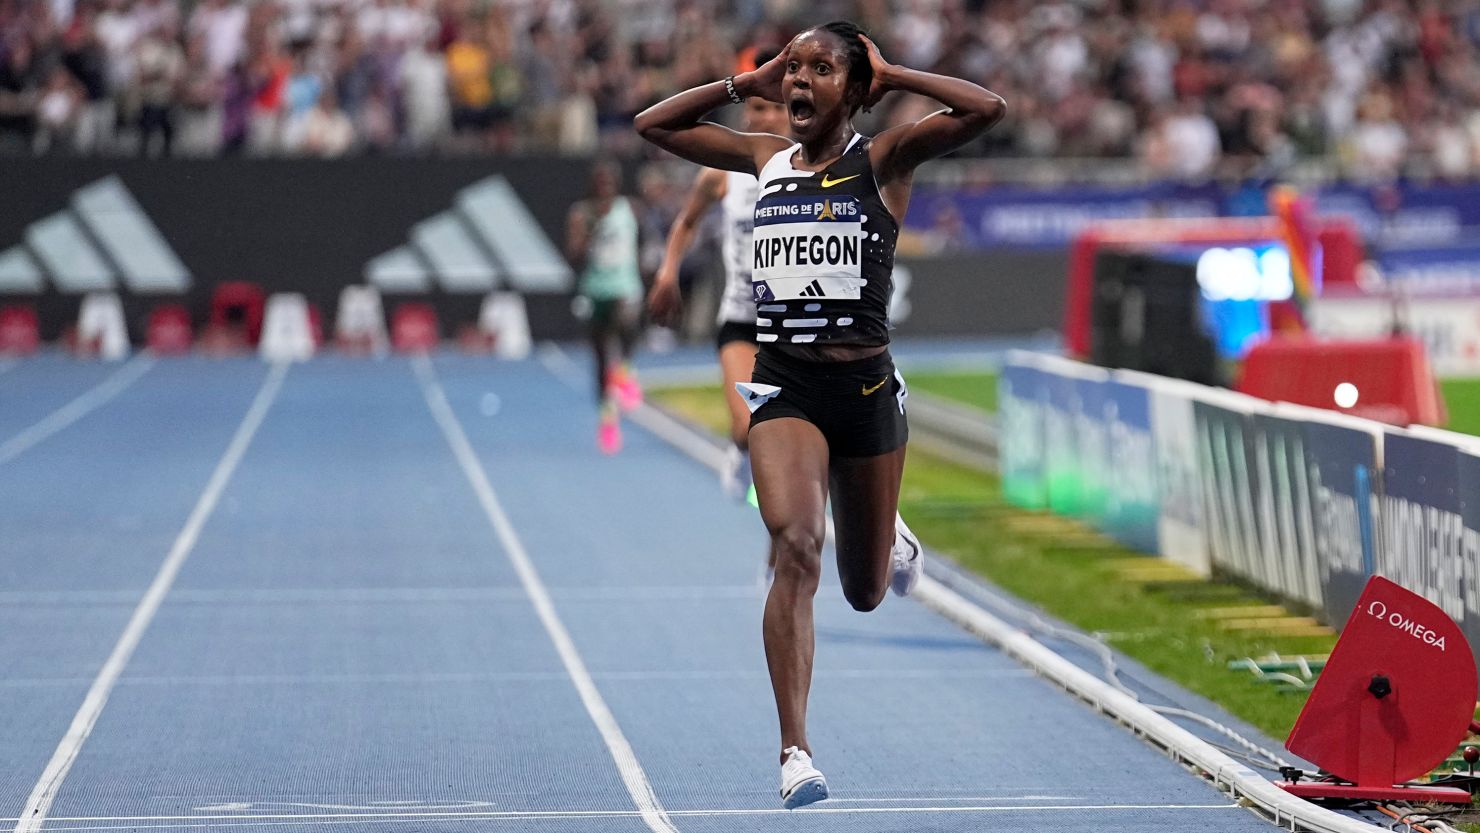 Faith Kipyegon, of Kenya, crosses the finish line to win the Women 5000 meters setting a new world record during the Meeting de Paris Diamond League athletics meet in Paris, Friday, June 9, 2023.